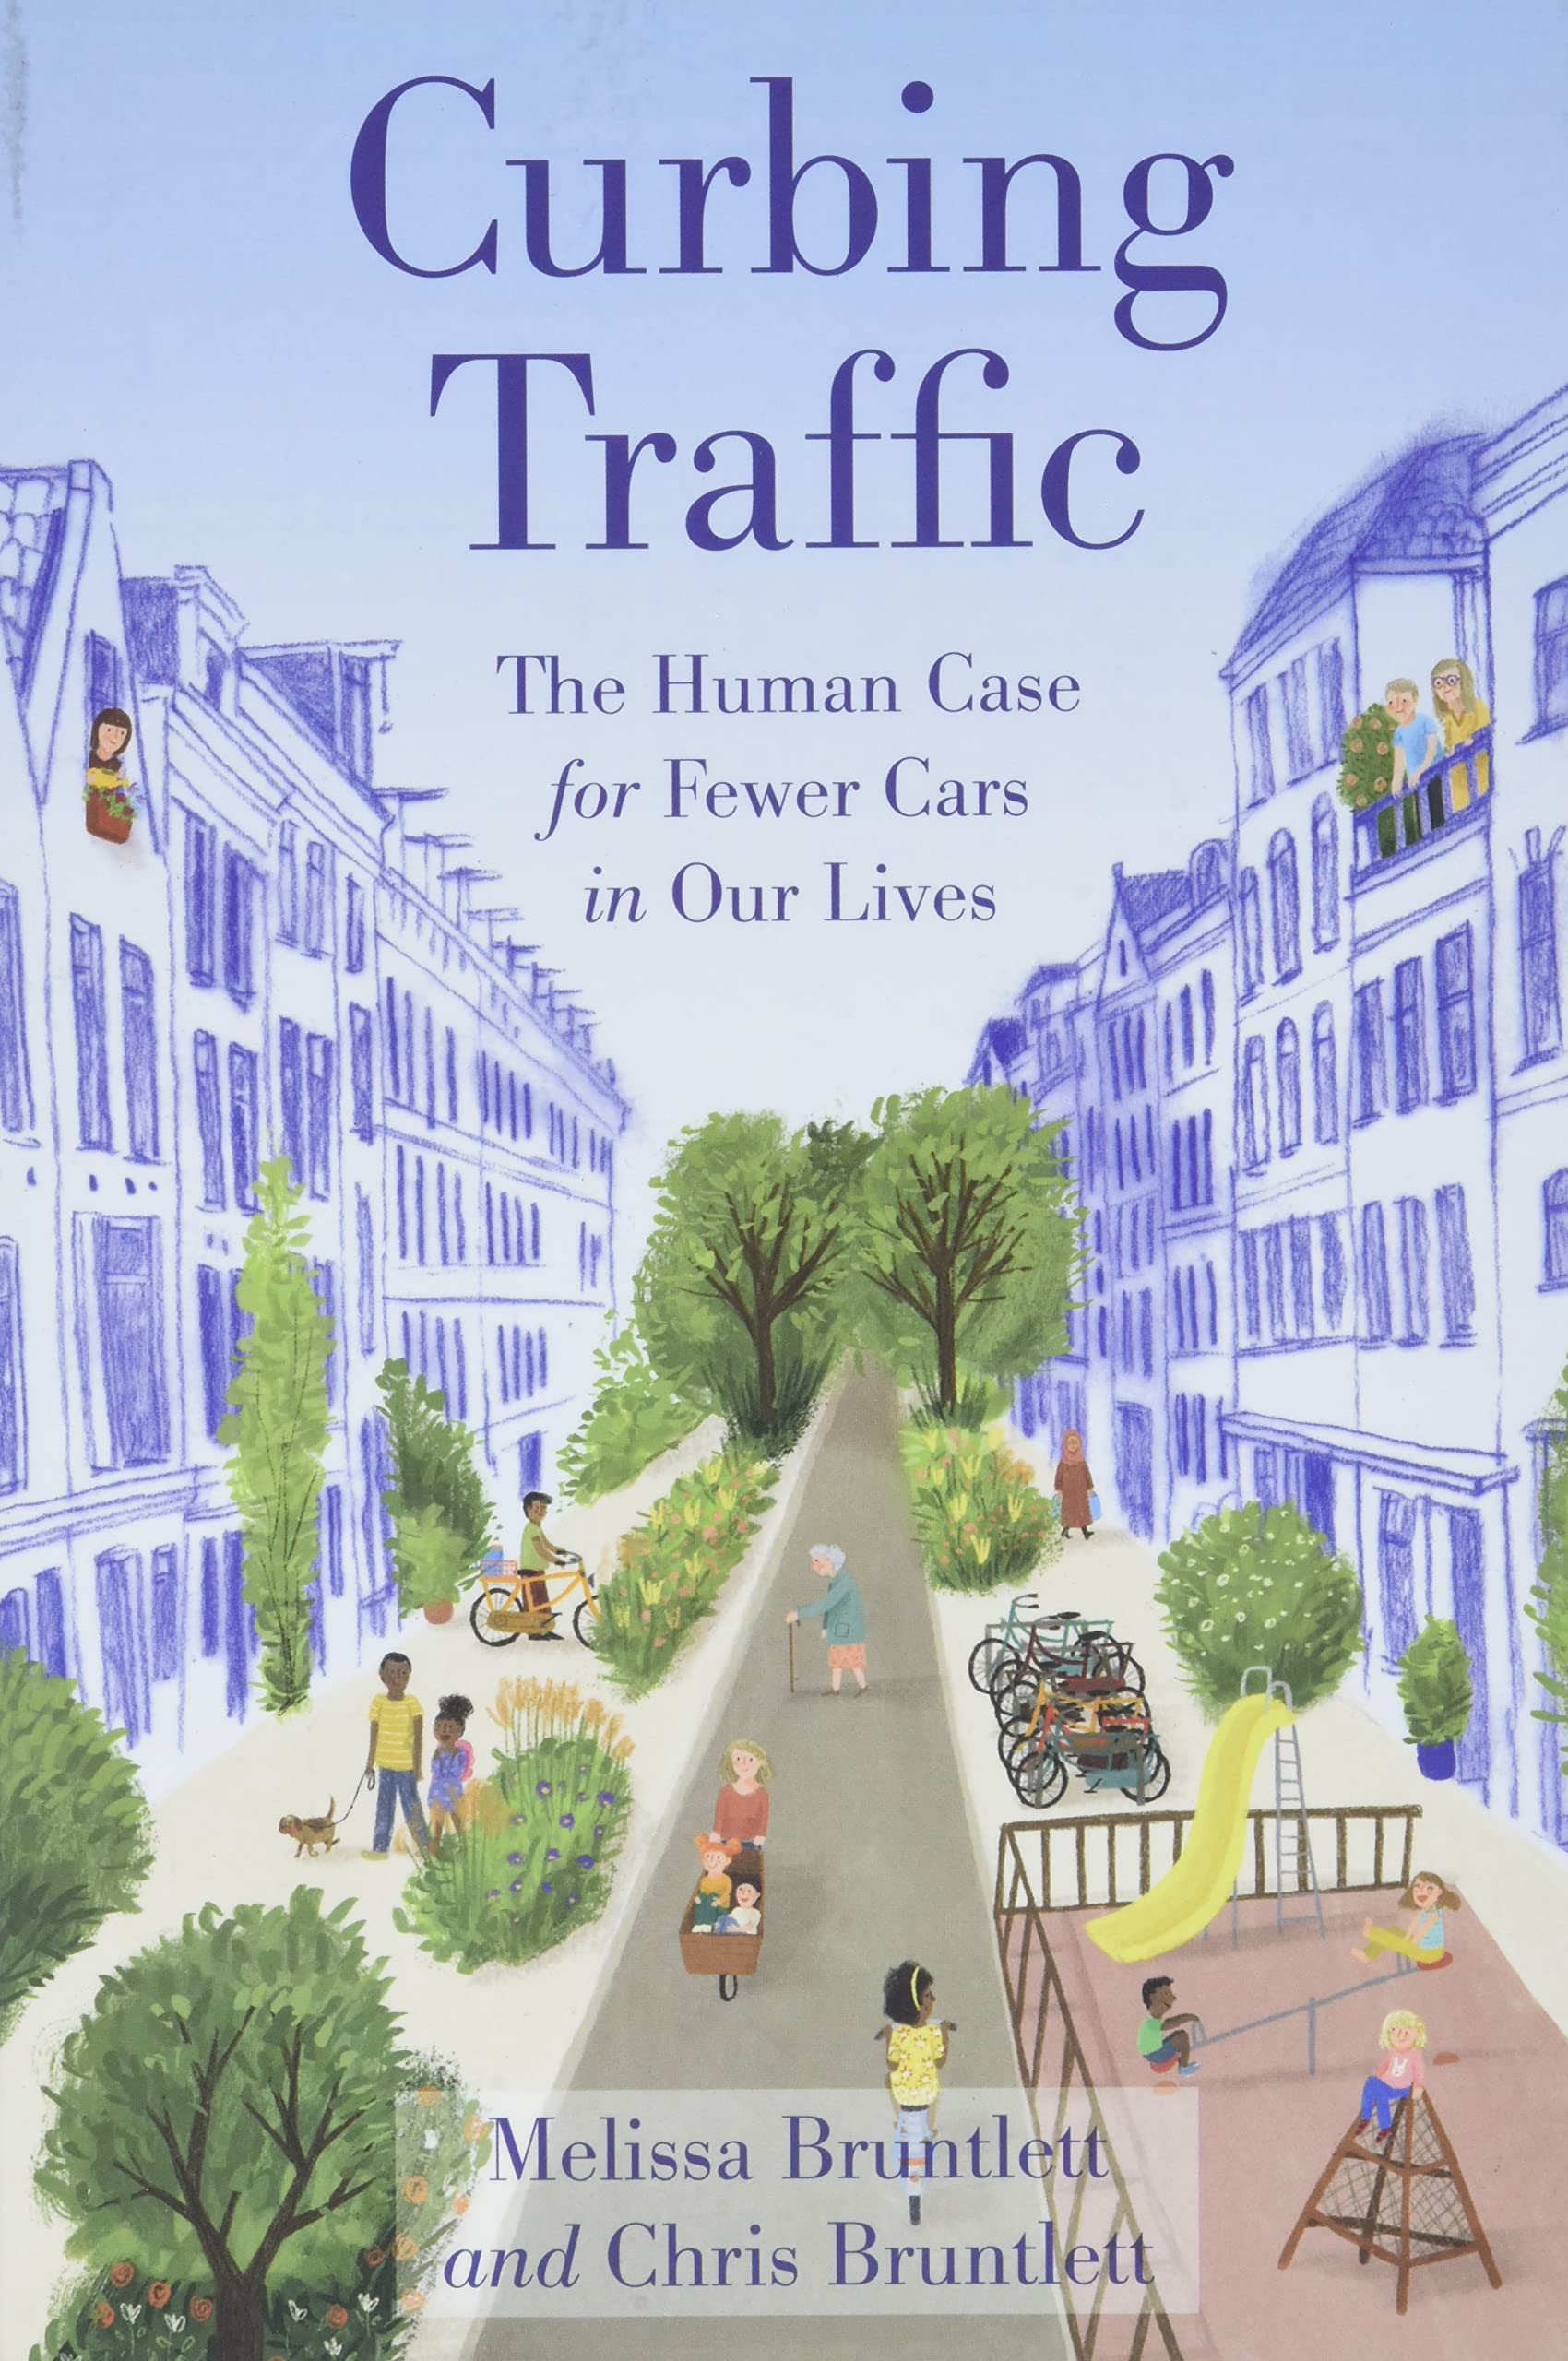 Curving traffic book cover